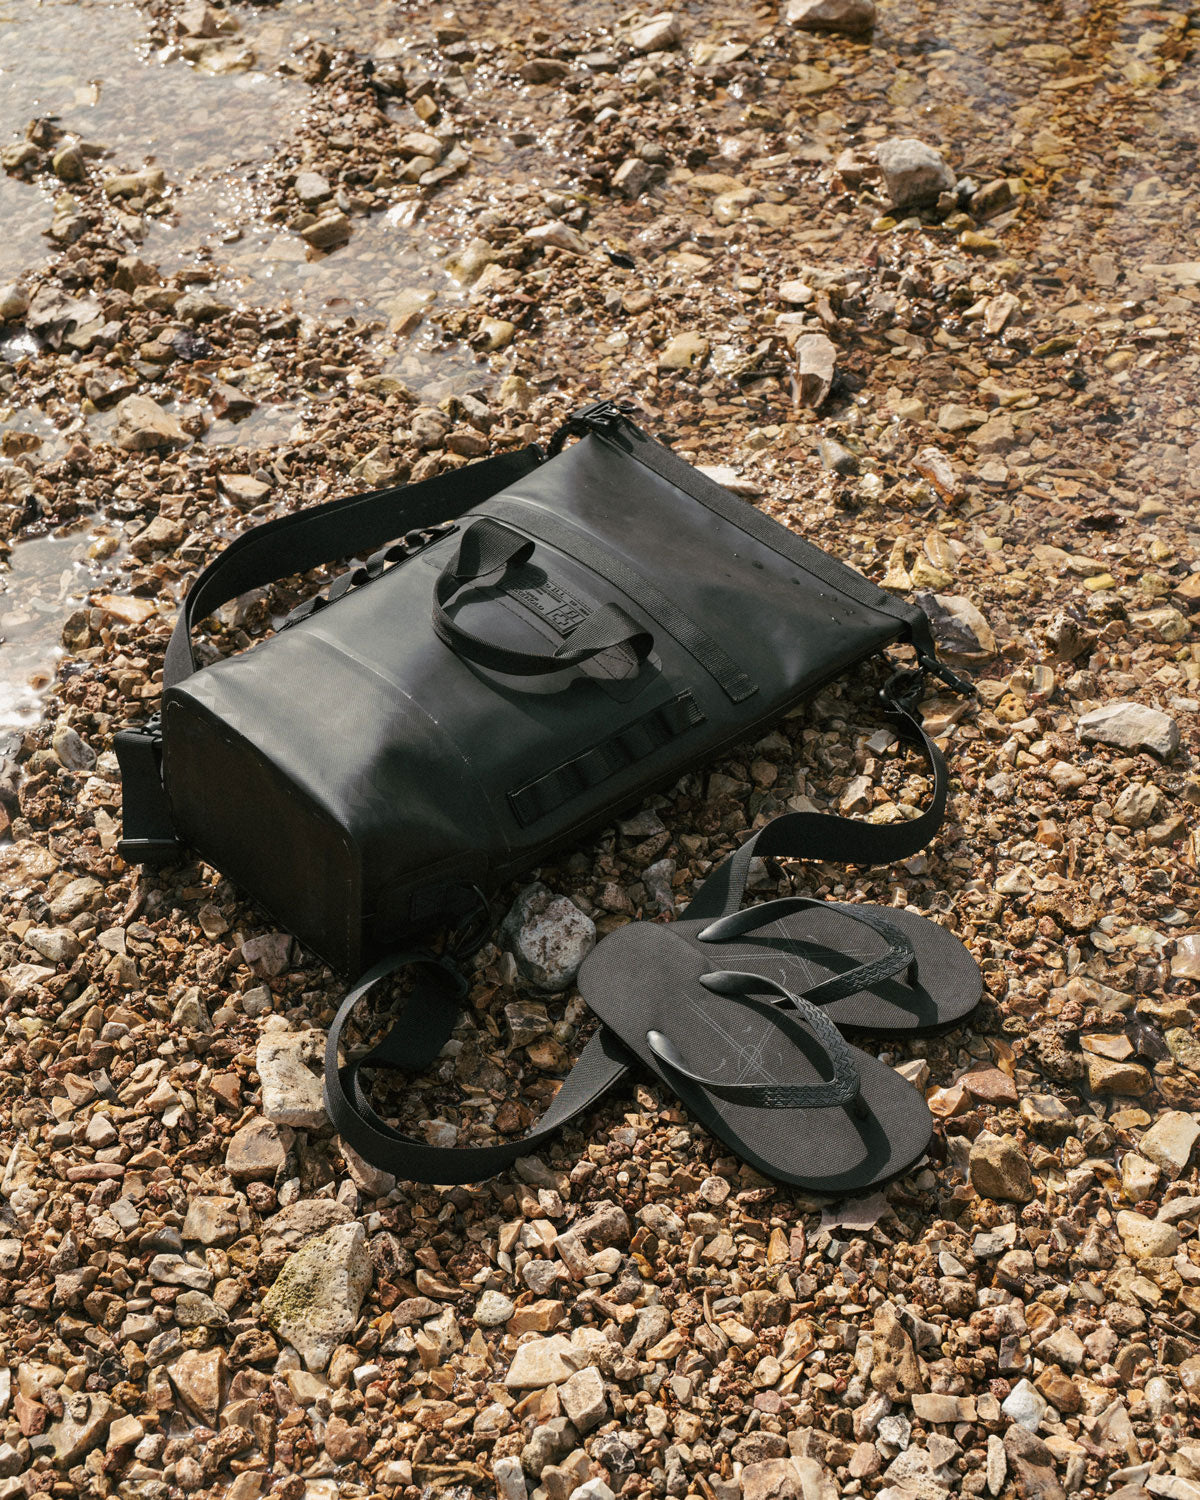 Jason Momoa's on the roam x so ill kanakas pictured in a creek bed with the 25L dirt bag